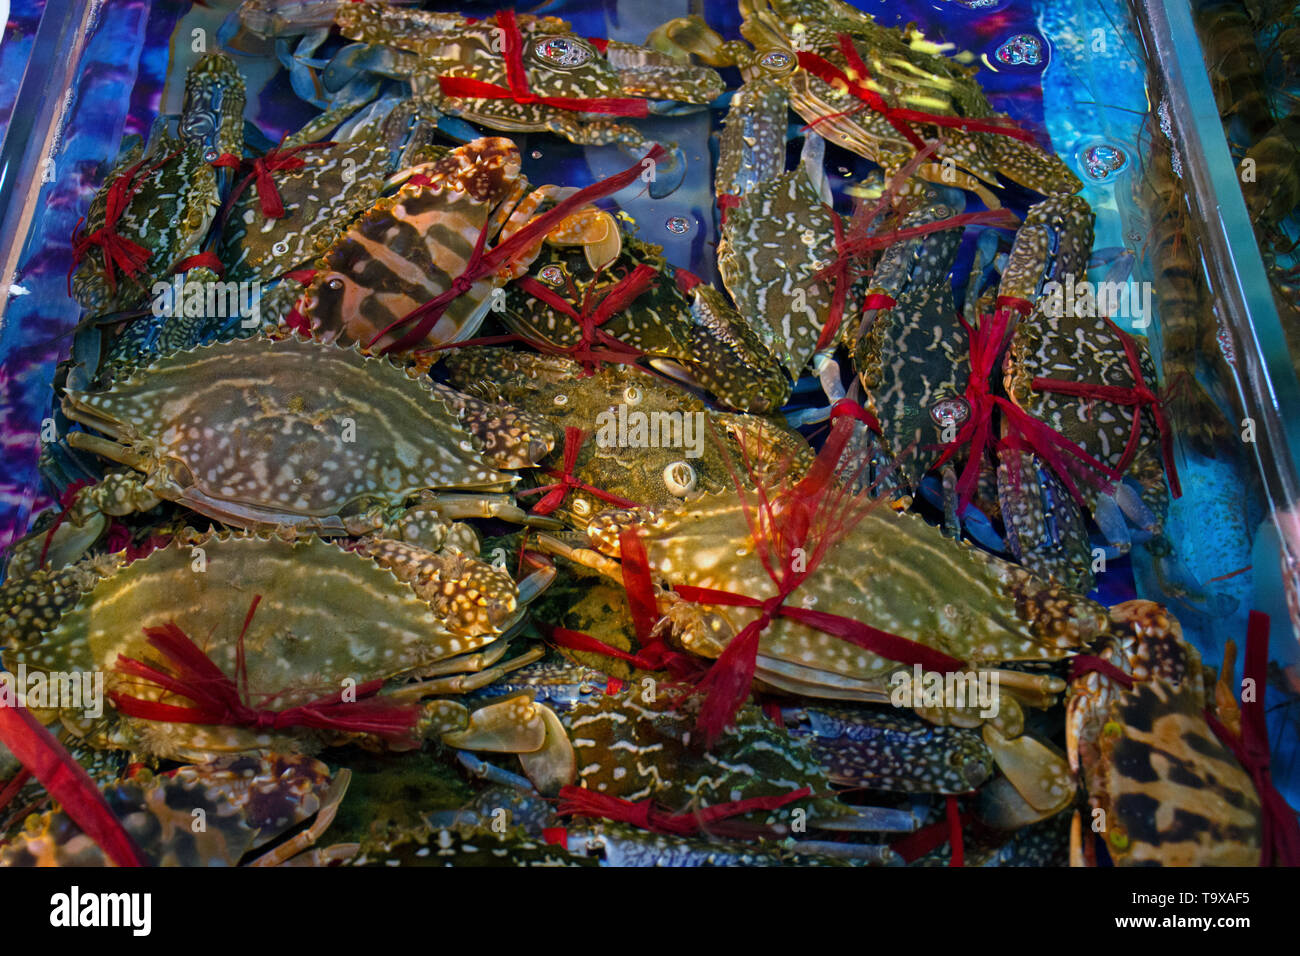 Crabs for sale at the seafood market in Haikou, Hainan Island, China Stock Photo